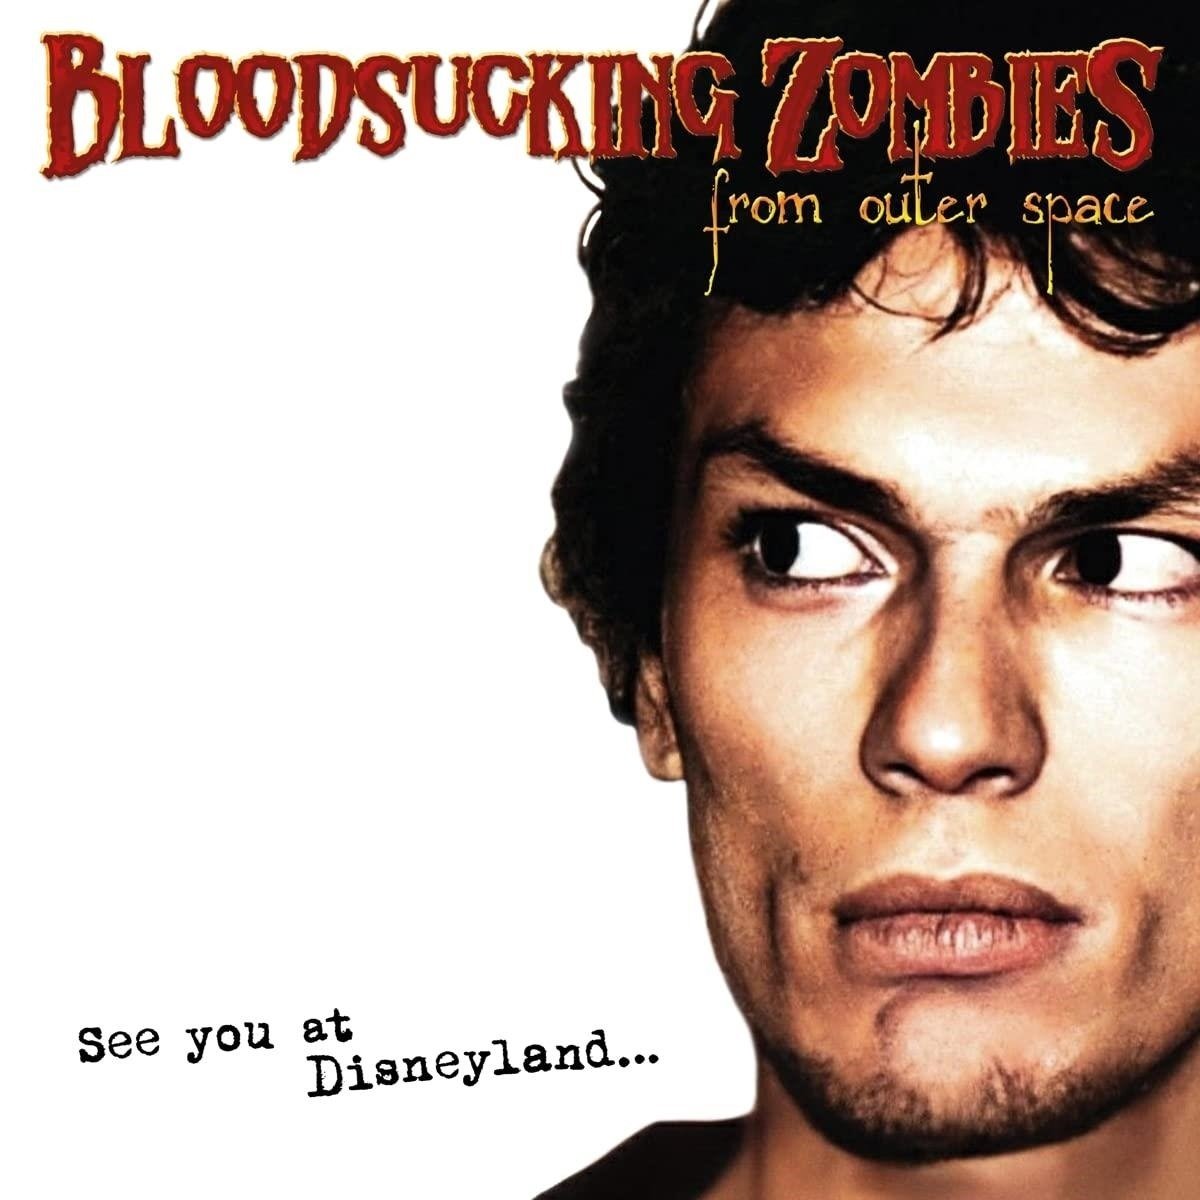 CD Shop - BLOODSUCKING ZOMBIES FROM OUTER SPACE SEE YOU AT DISNEYLAND